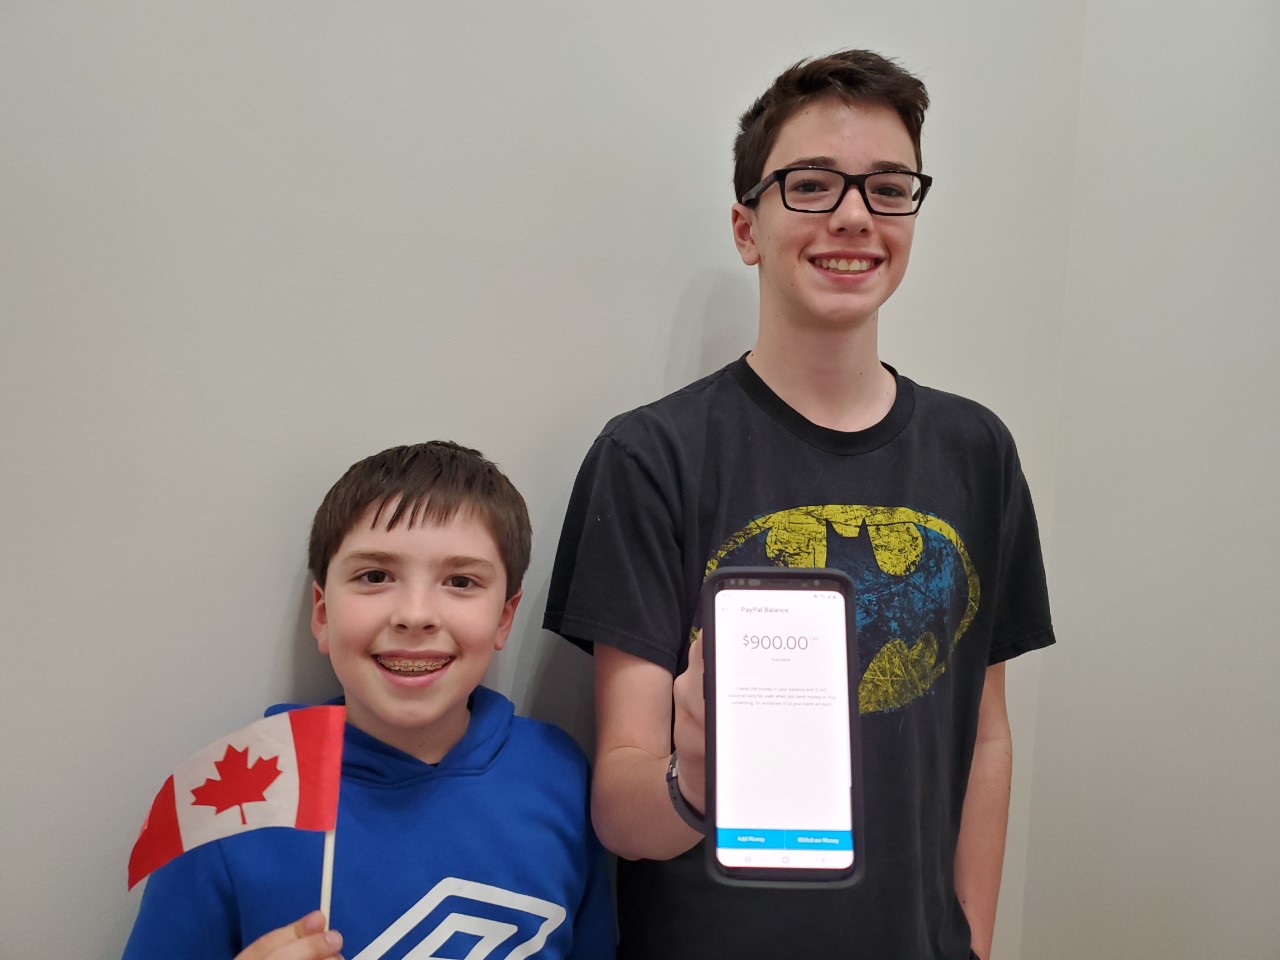 Grayson and Jackson Peddle are nominated by the University of Saskatchewan for Youth in Philanthropy award for this year's National Philanthropy Day. (Photo: Submitted)